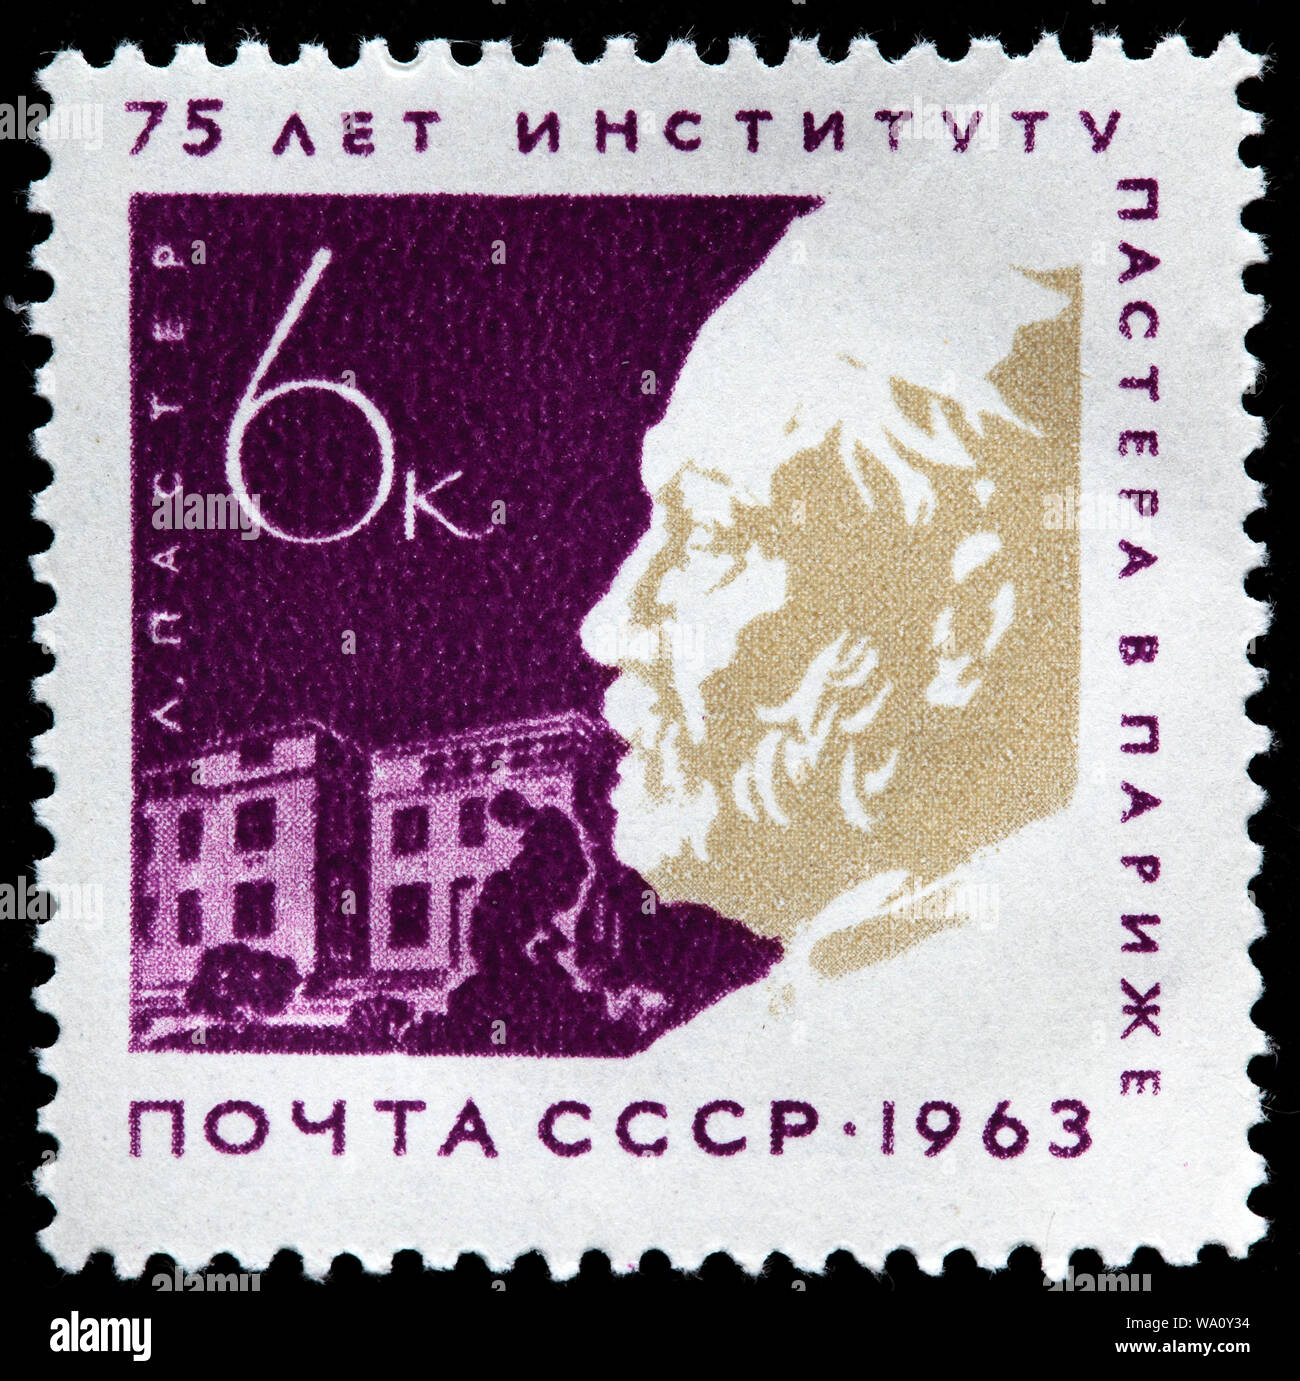 Louis Pasteur (1822-1895), French biologist, microbiologist, chemist, 75th Anniversary of Pasteur Institute in Paris, postage stamp, Russia, USSR, 196 Stock Photo